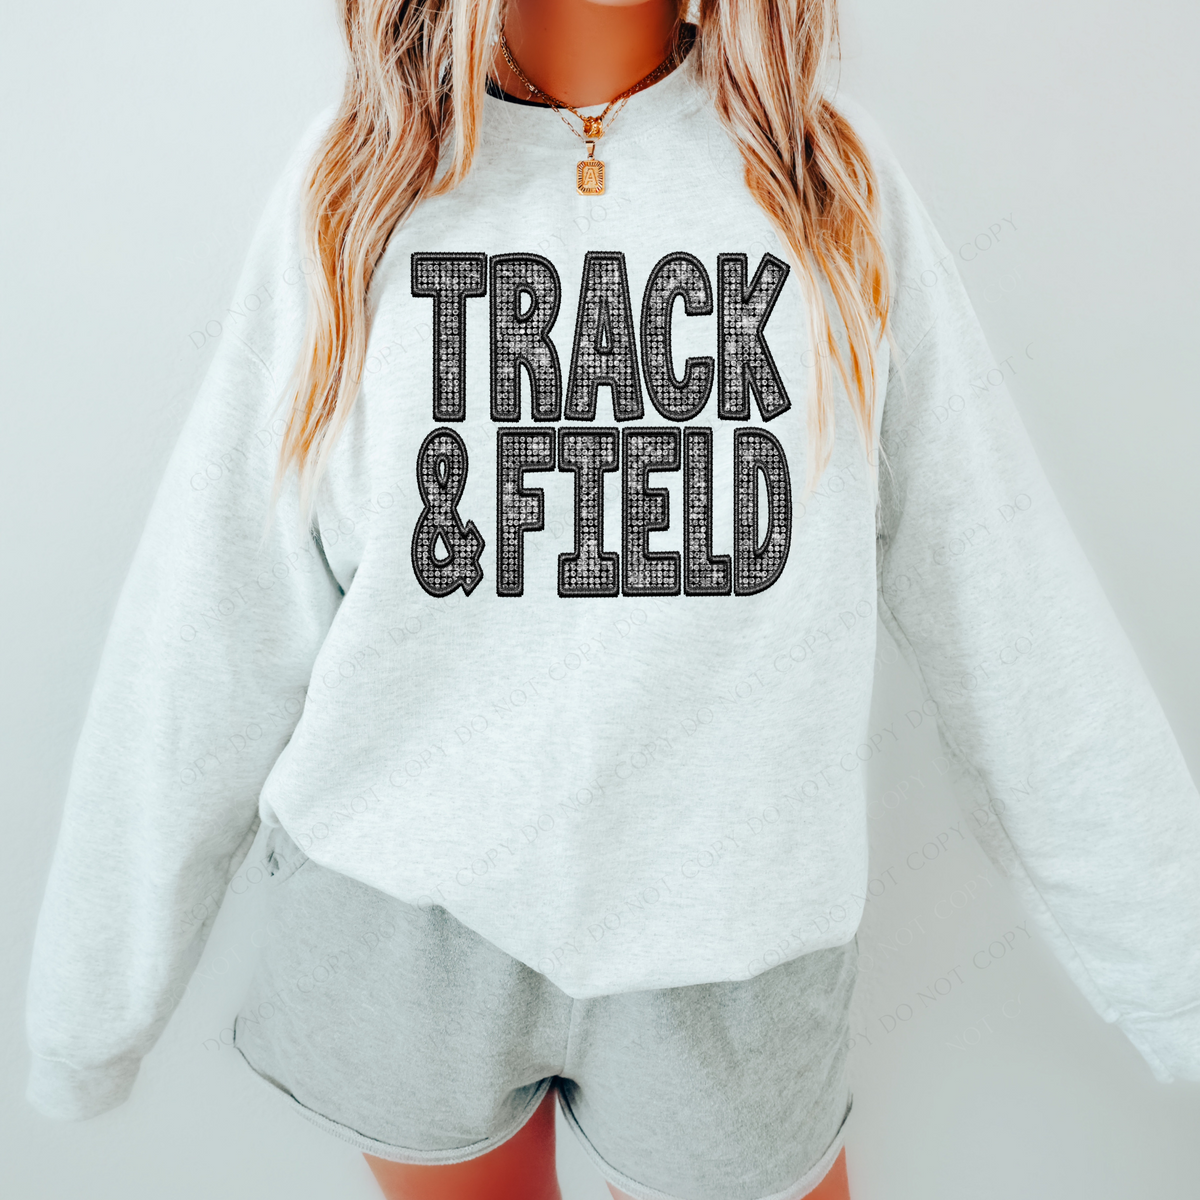 Track & Field Faux Embroidery Diamonds Bling in Black Digital Design, PNG